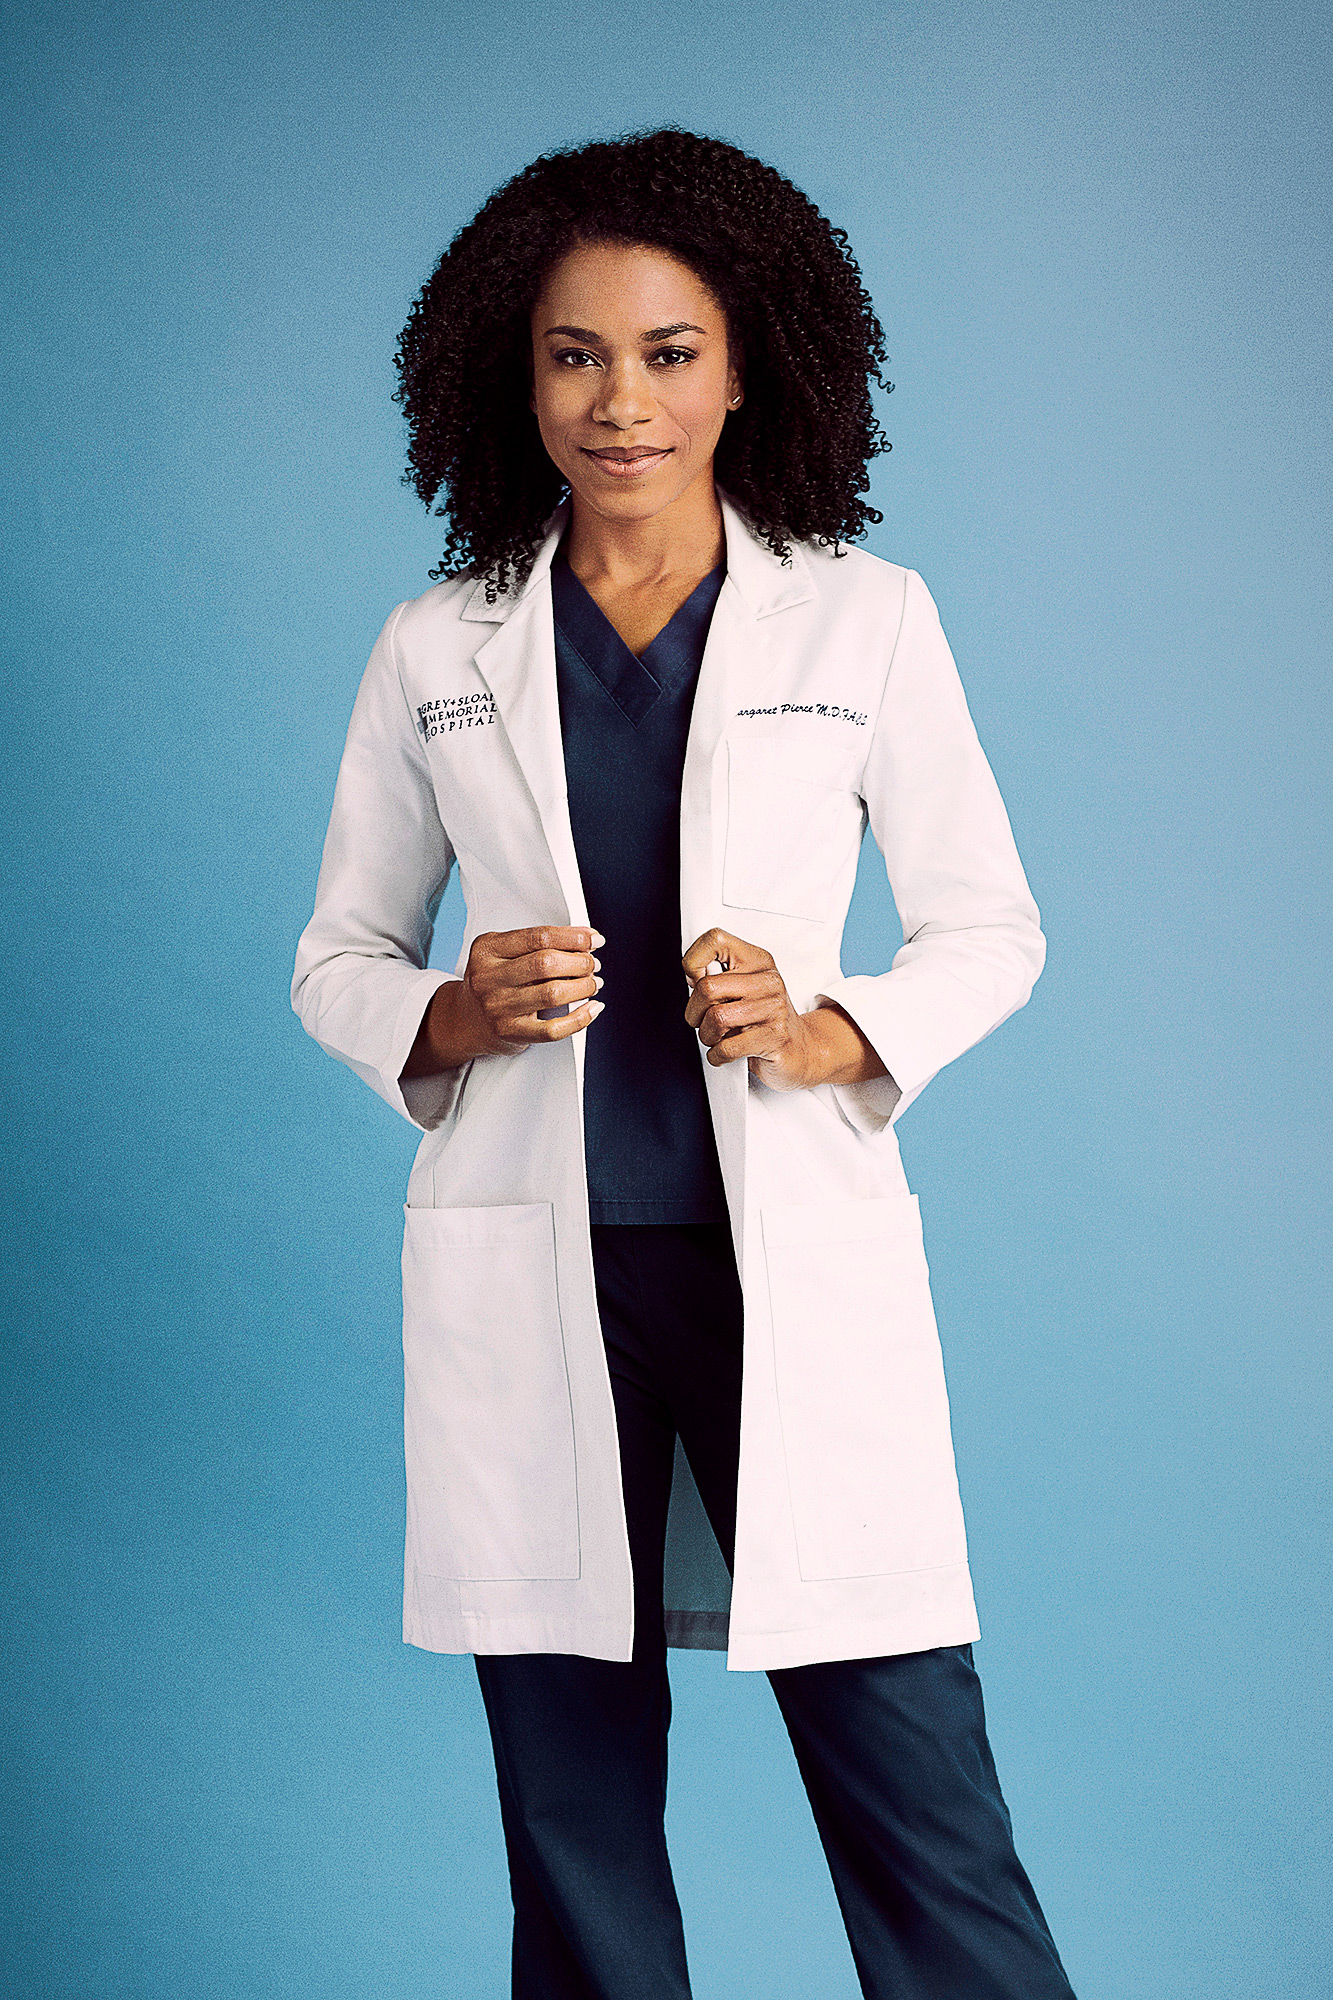 Grey’s Anatomy’s Biggest Exits Over the Years- Who Quit? Who Was Fired? And Who Is Down to Come Back? - 118 Kelly McCreary